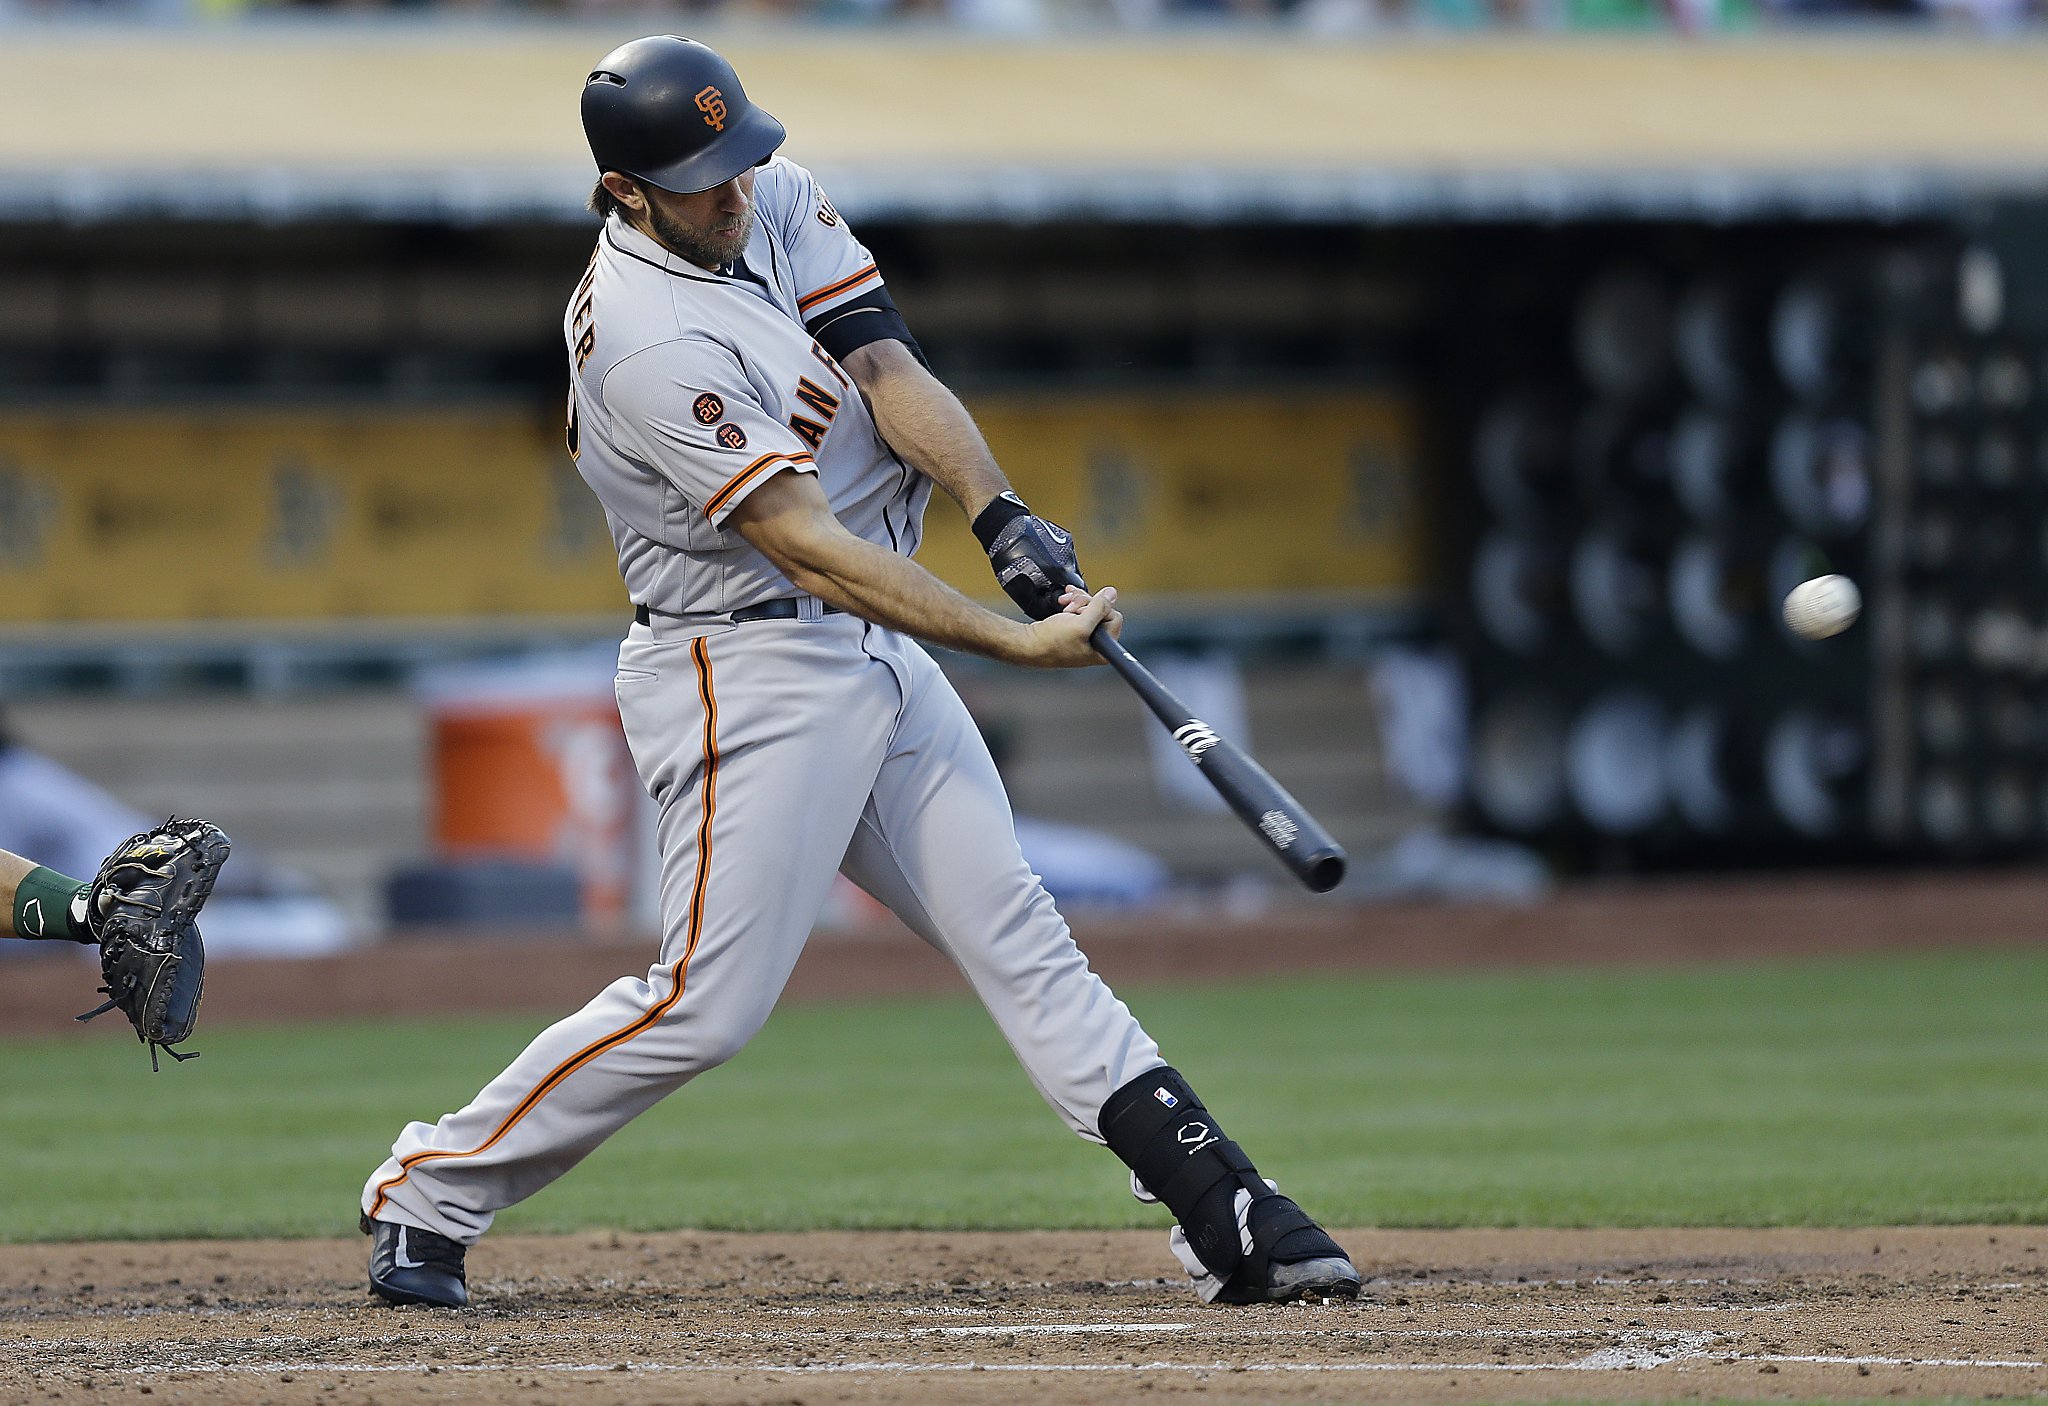 June 30, 2016: Giants use Madison Bumgarner as DH, beat A's